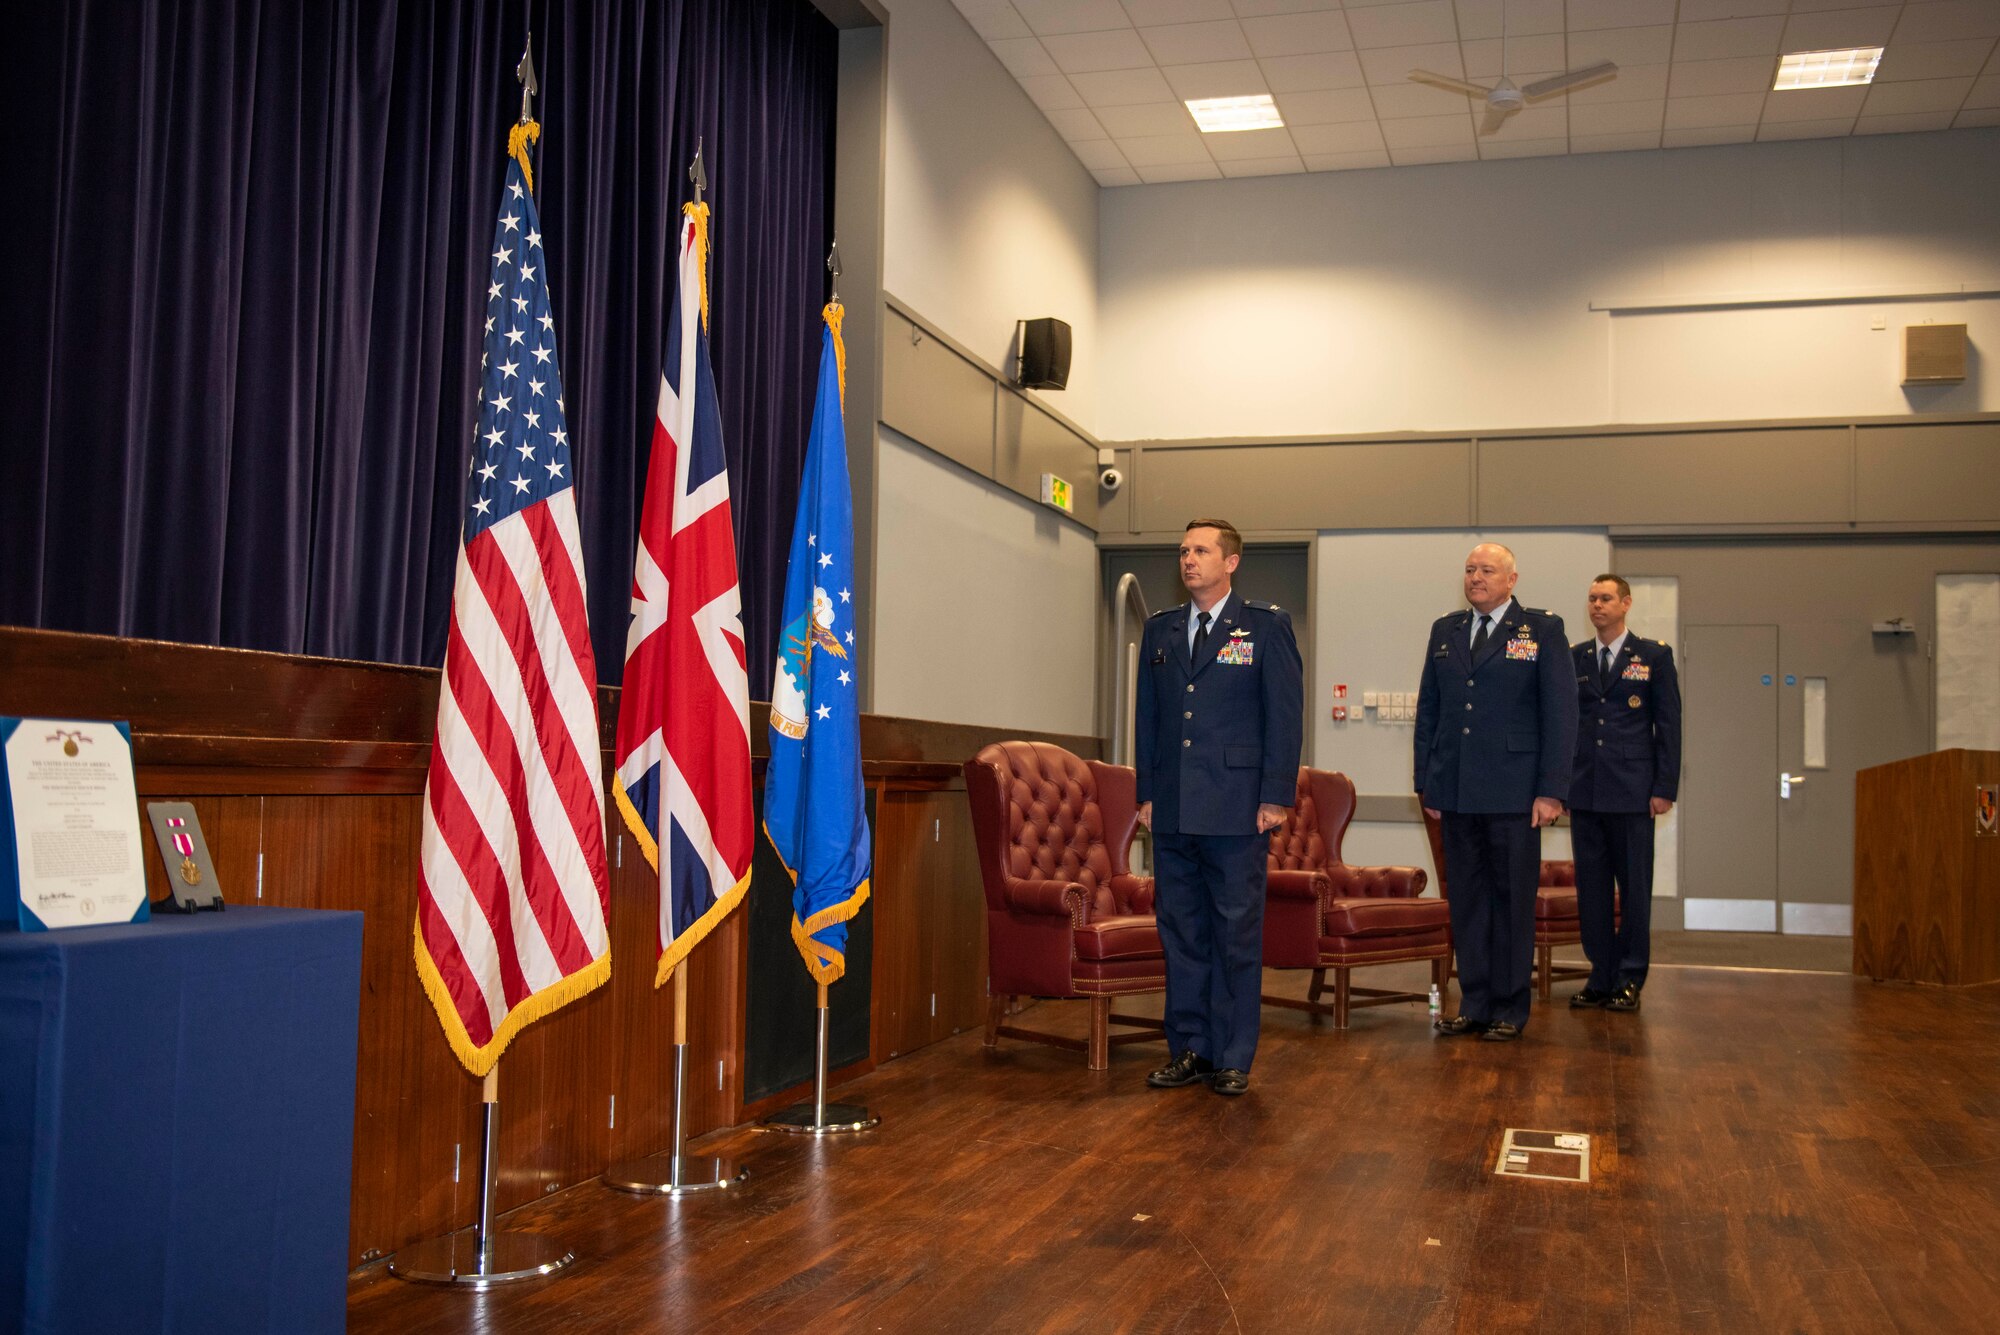 U.S. Air Force Col. Jon Hannah (left), 422d Air Base Group commander, Lt. Col. Matthew Ramstack (center), 422nd Air Base Squadron outgoing commander, and Maj. Timothy Kirchner (right), 422nd ABS incoming commander, stand at attention for the playing of the national anthem during a change of command ceremony at RAF Croughton, England, July 9, 2020. The change of command ceremony is rooted in military history dating back to the 18th century representing the relinquishing of power from one officer to another. (U.S. Air Force photo by Airman 1st Class Jennifer Zima)